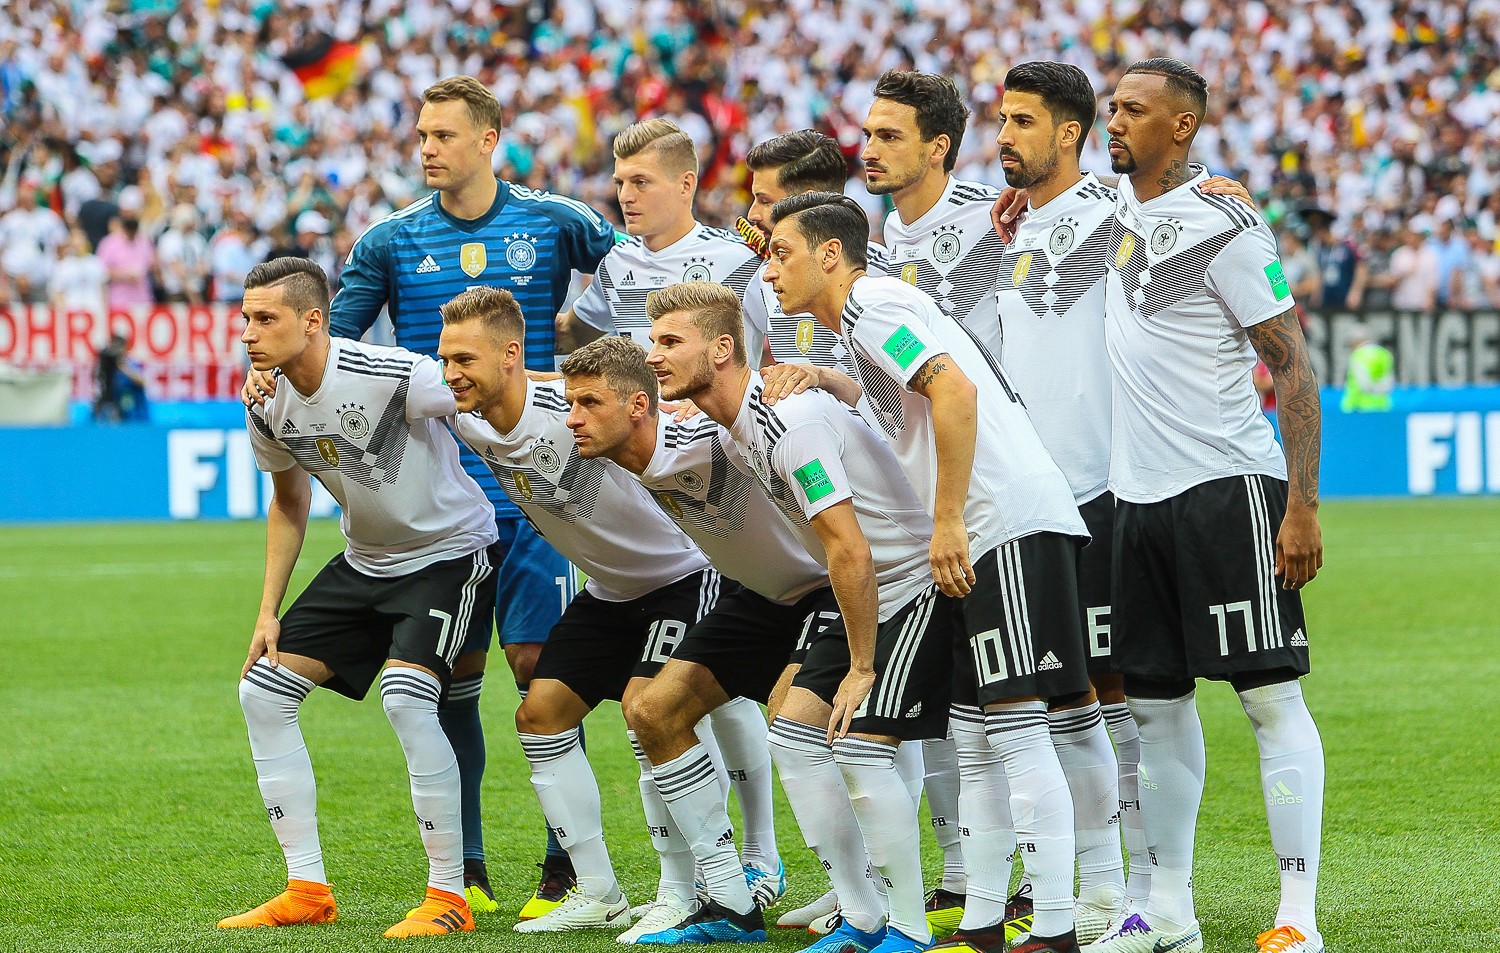 German players to get 400,000 euros each in case of World Cup win